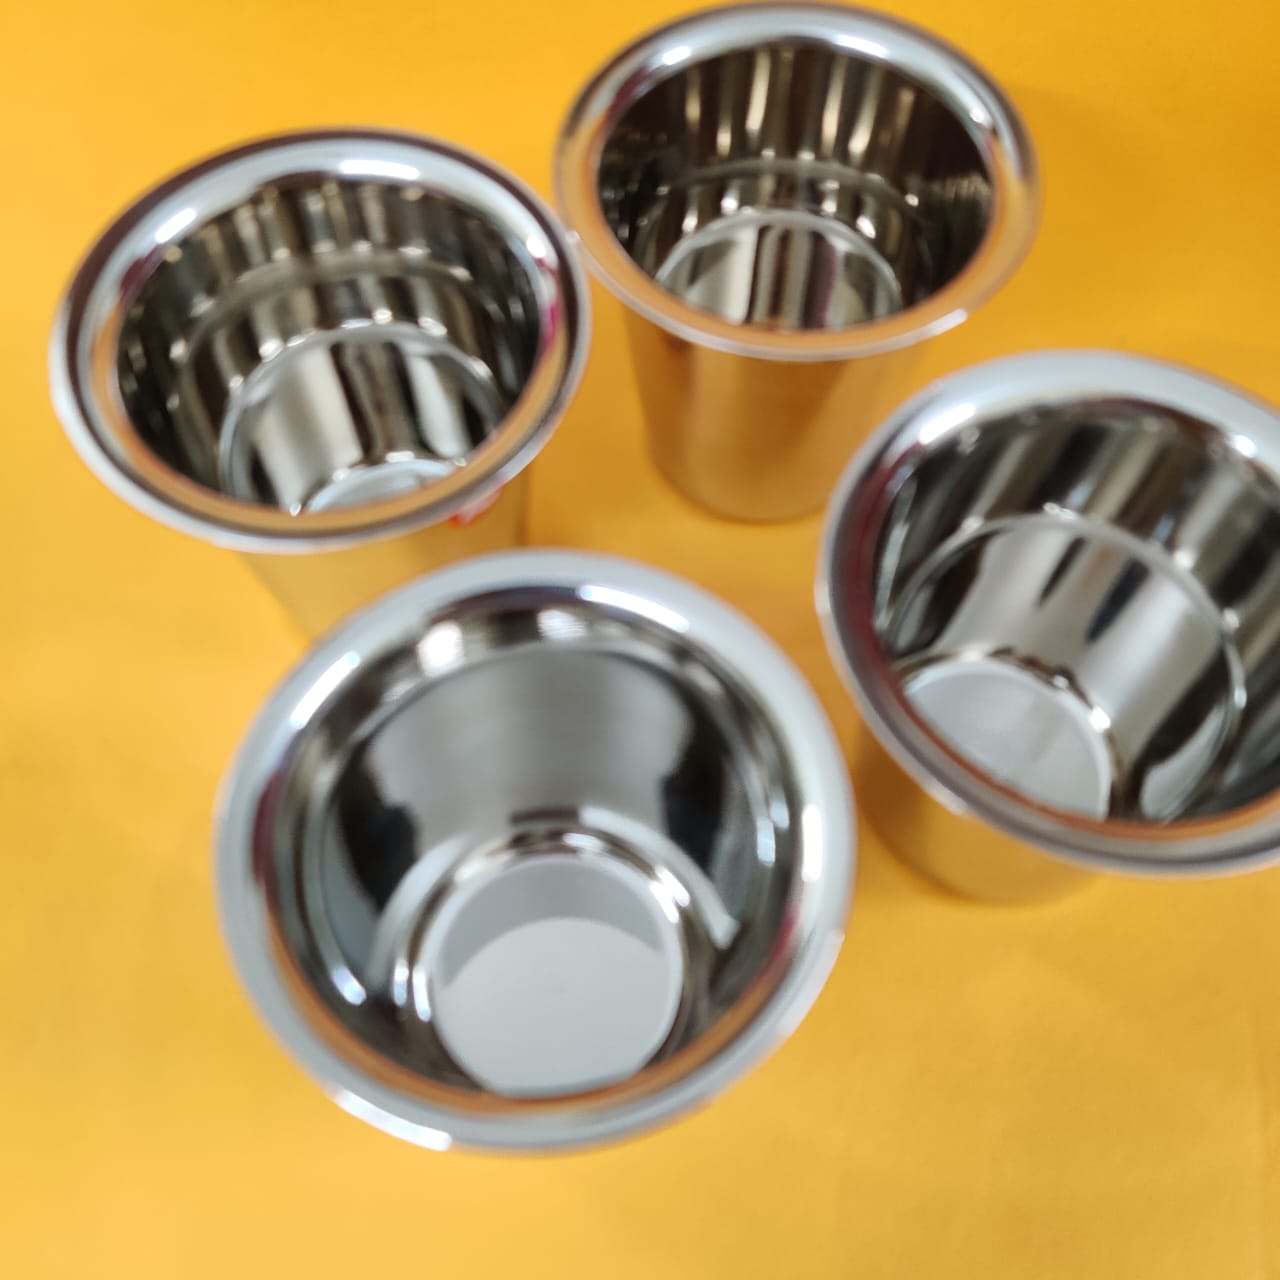 Stainless Steel Coffee Tumbler set of 4